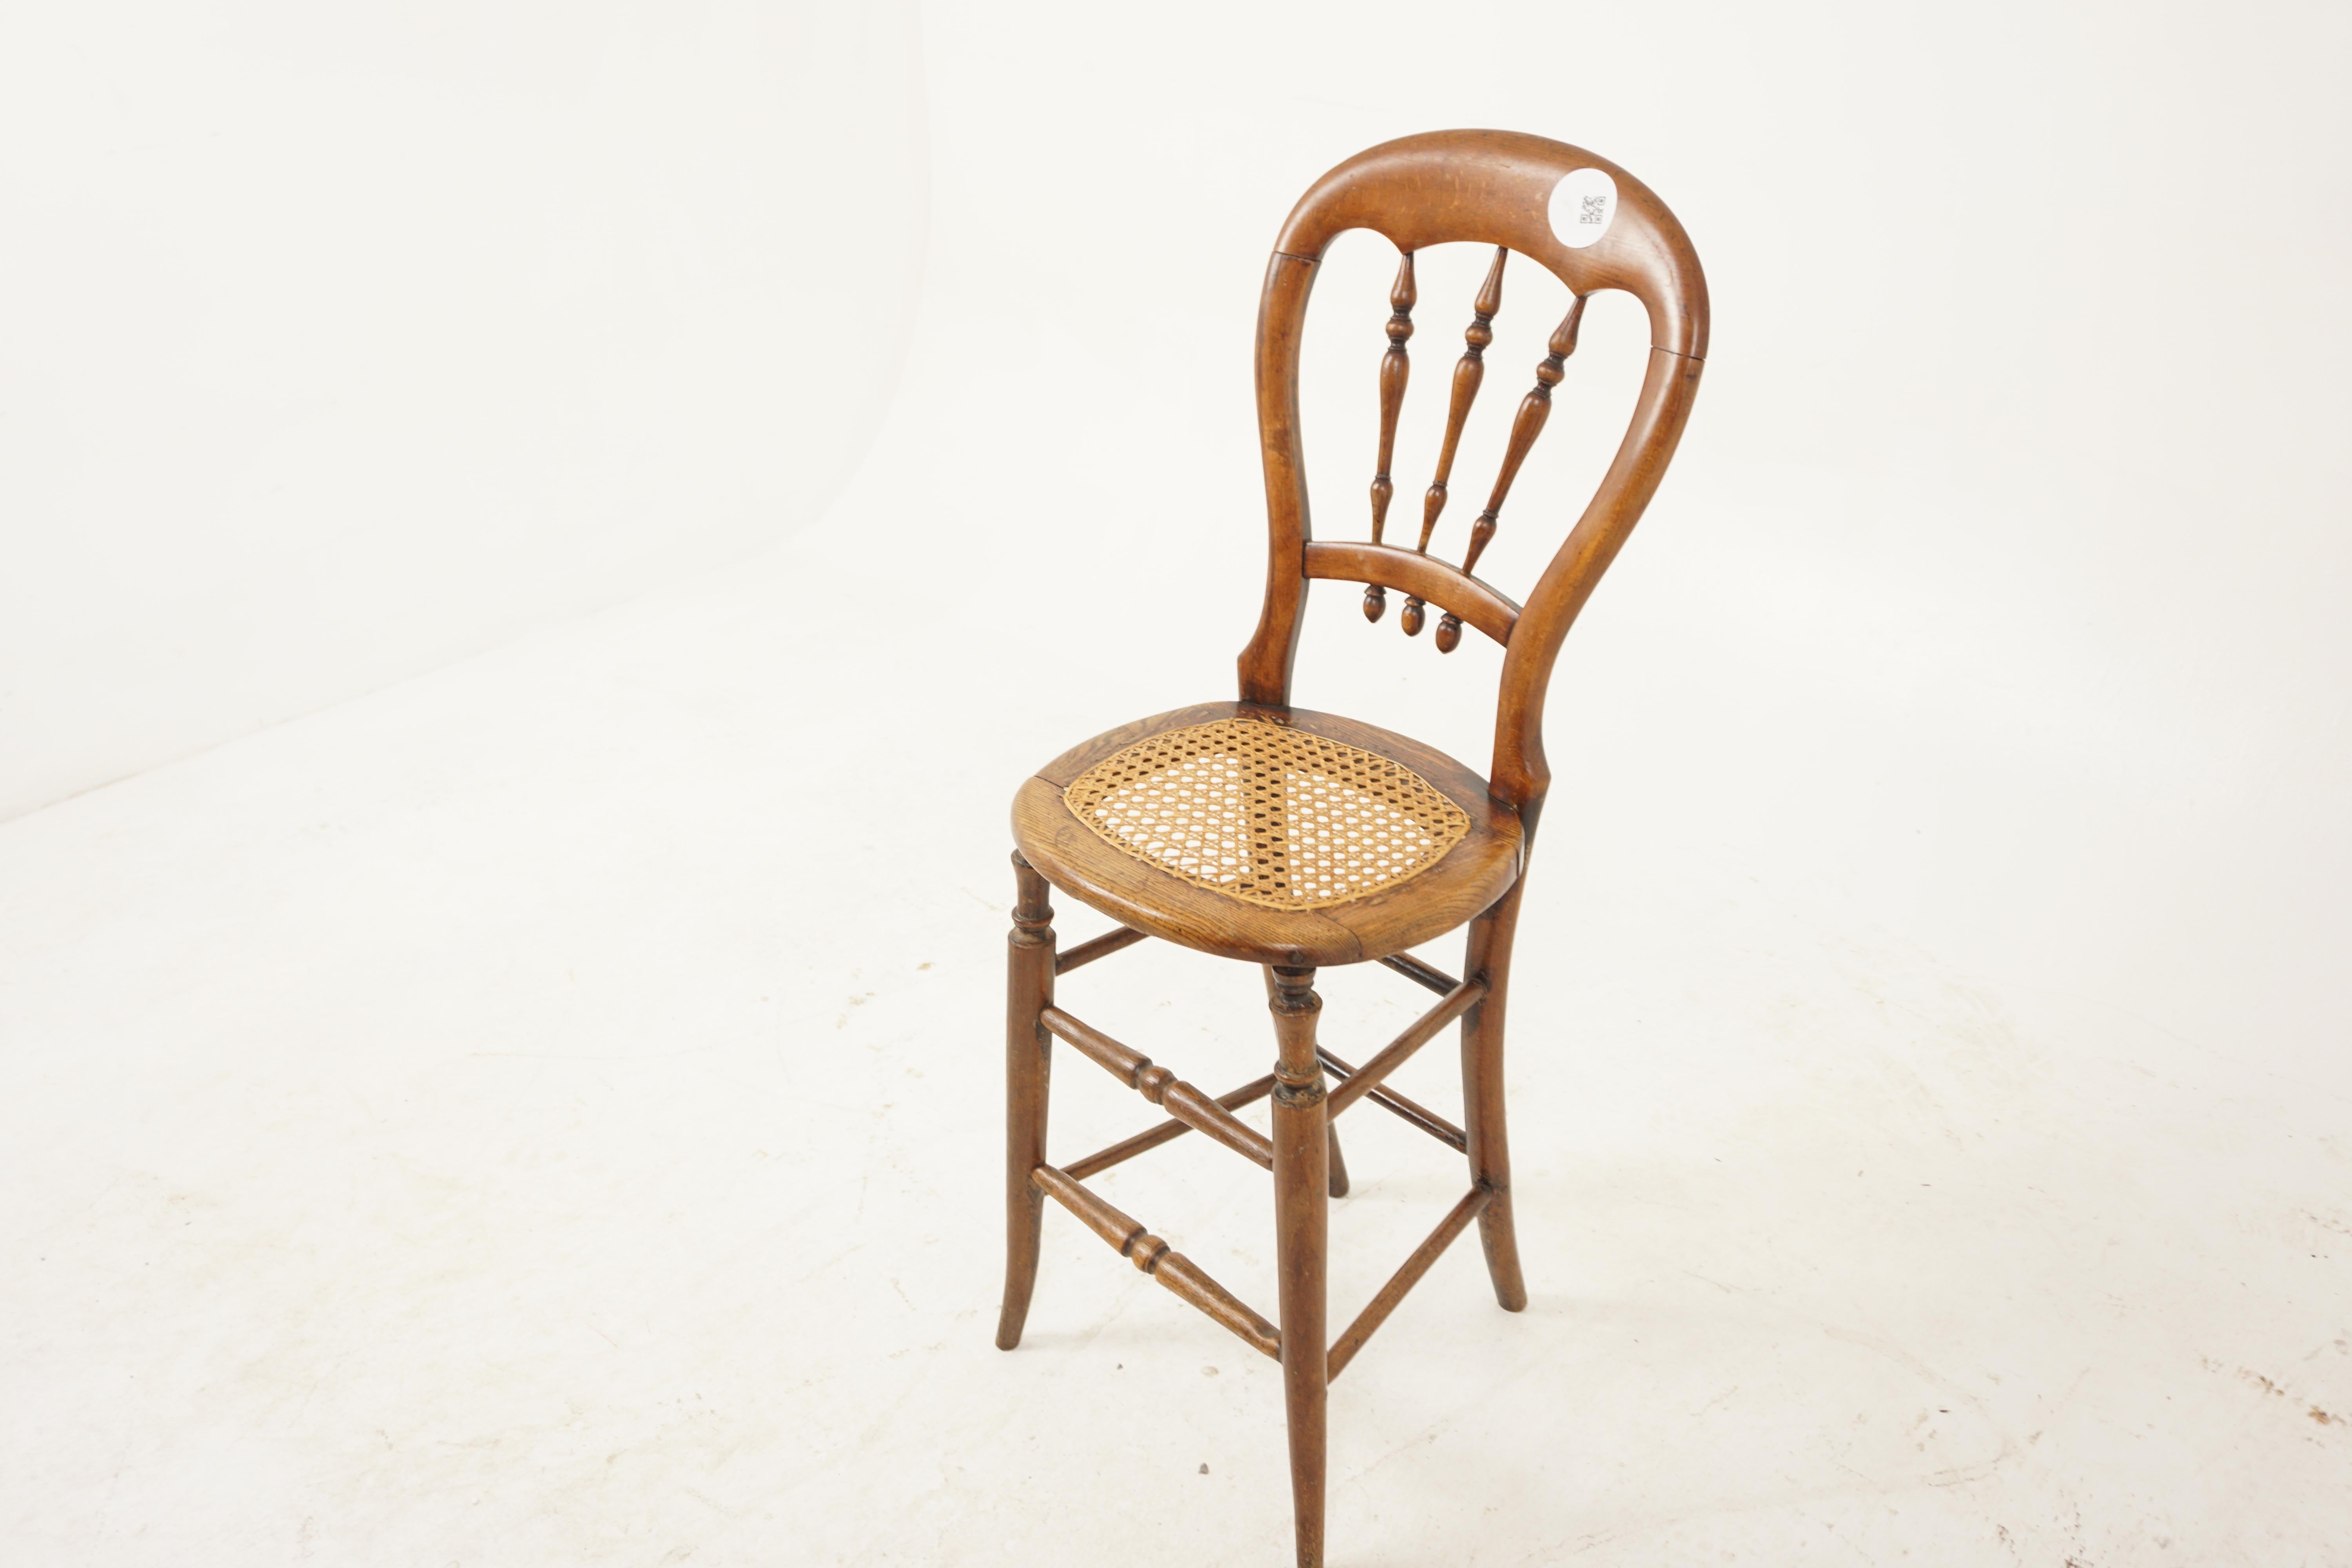 Antique Walnut Chair, Single Victorian Walnut High Back Chair, Antique Furniture, Scotland 1890, H1069

Scotland 1890
Solid Walnut
Original Finish
Tall rounded back with three vertical turned spindles 
Caned wooden framed seat
Standing on